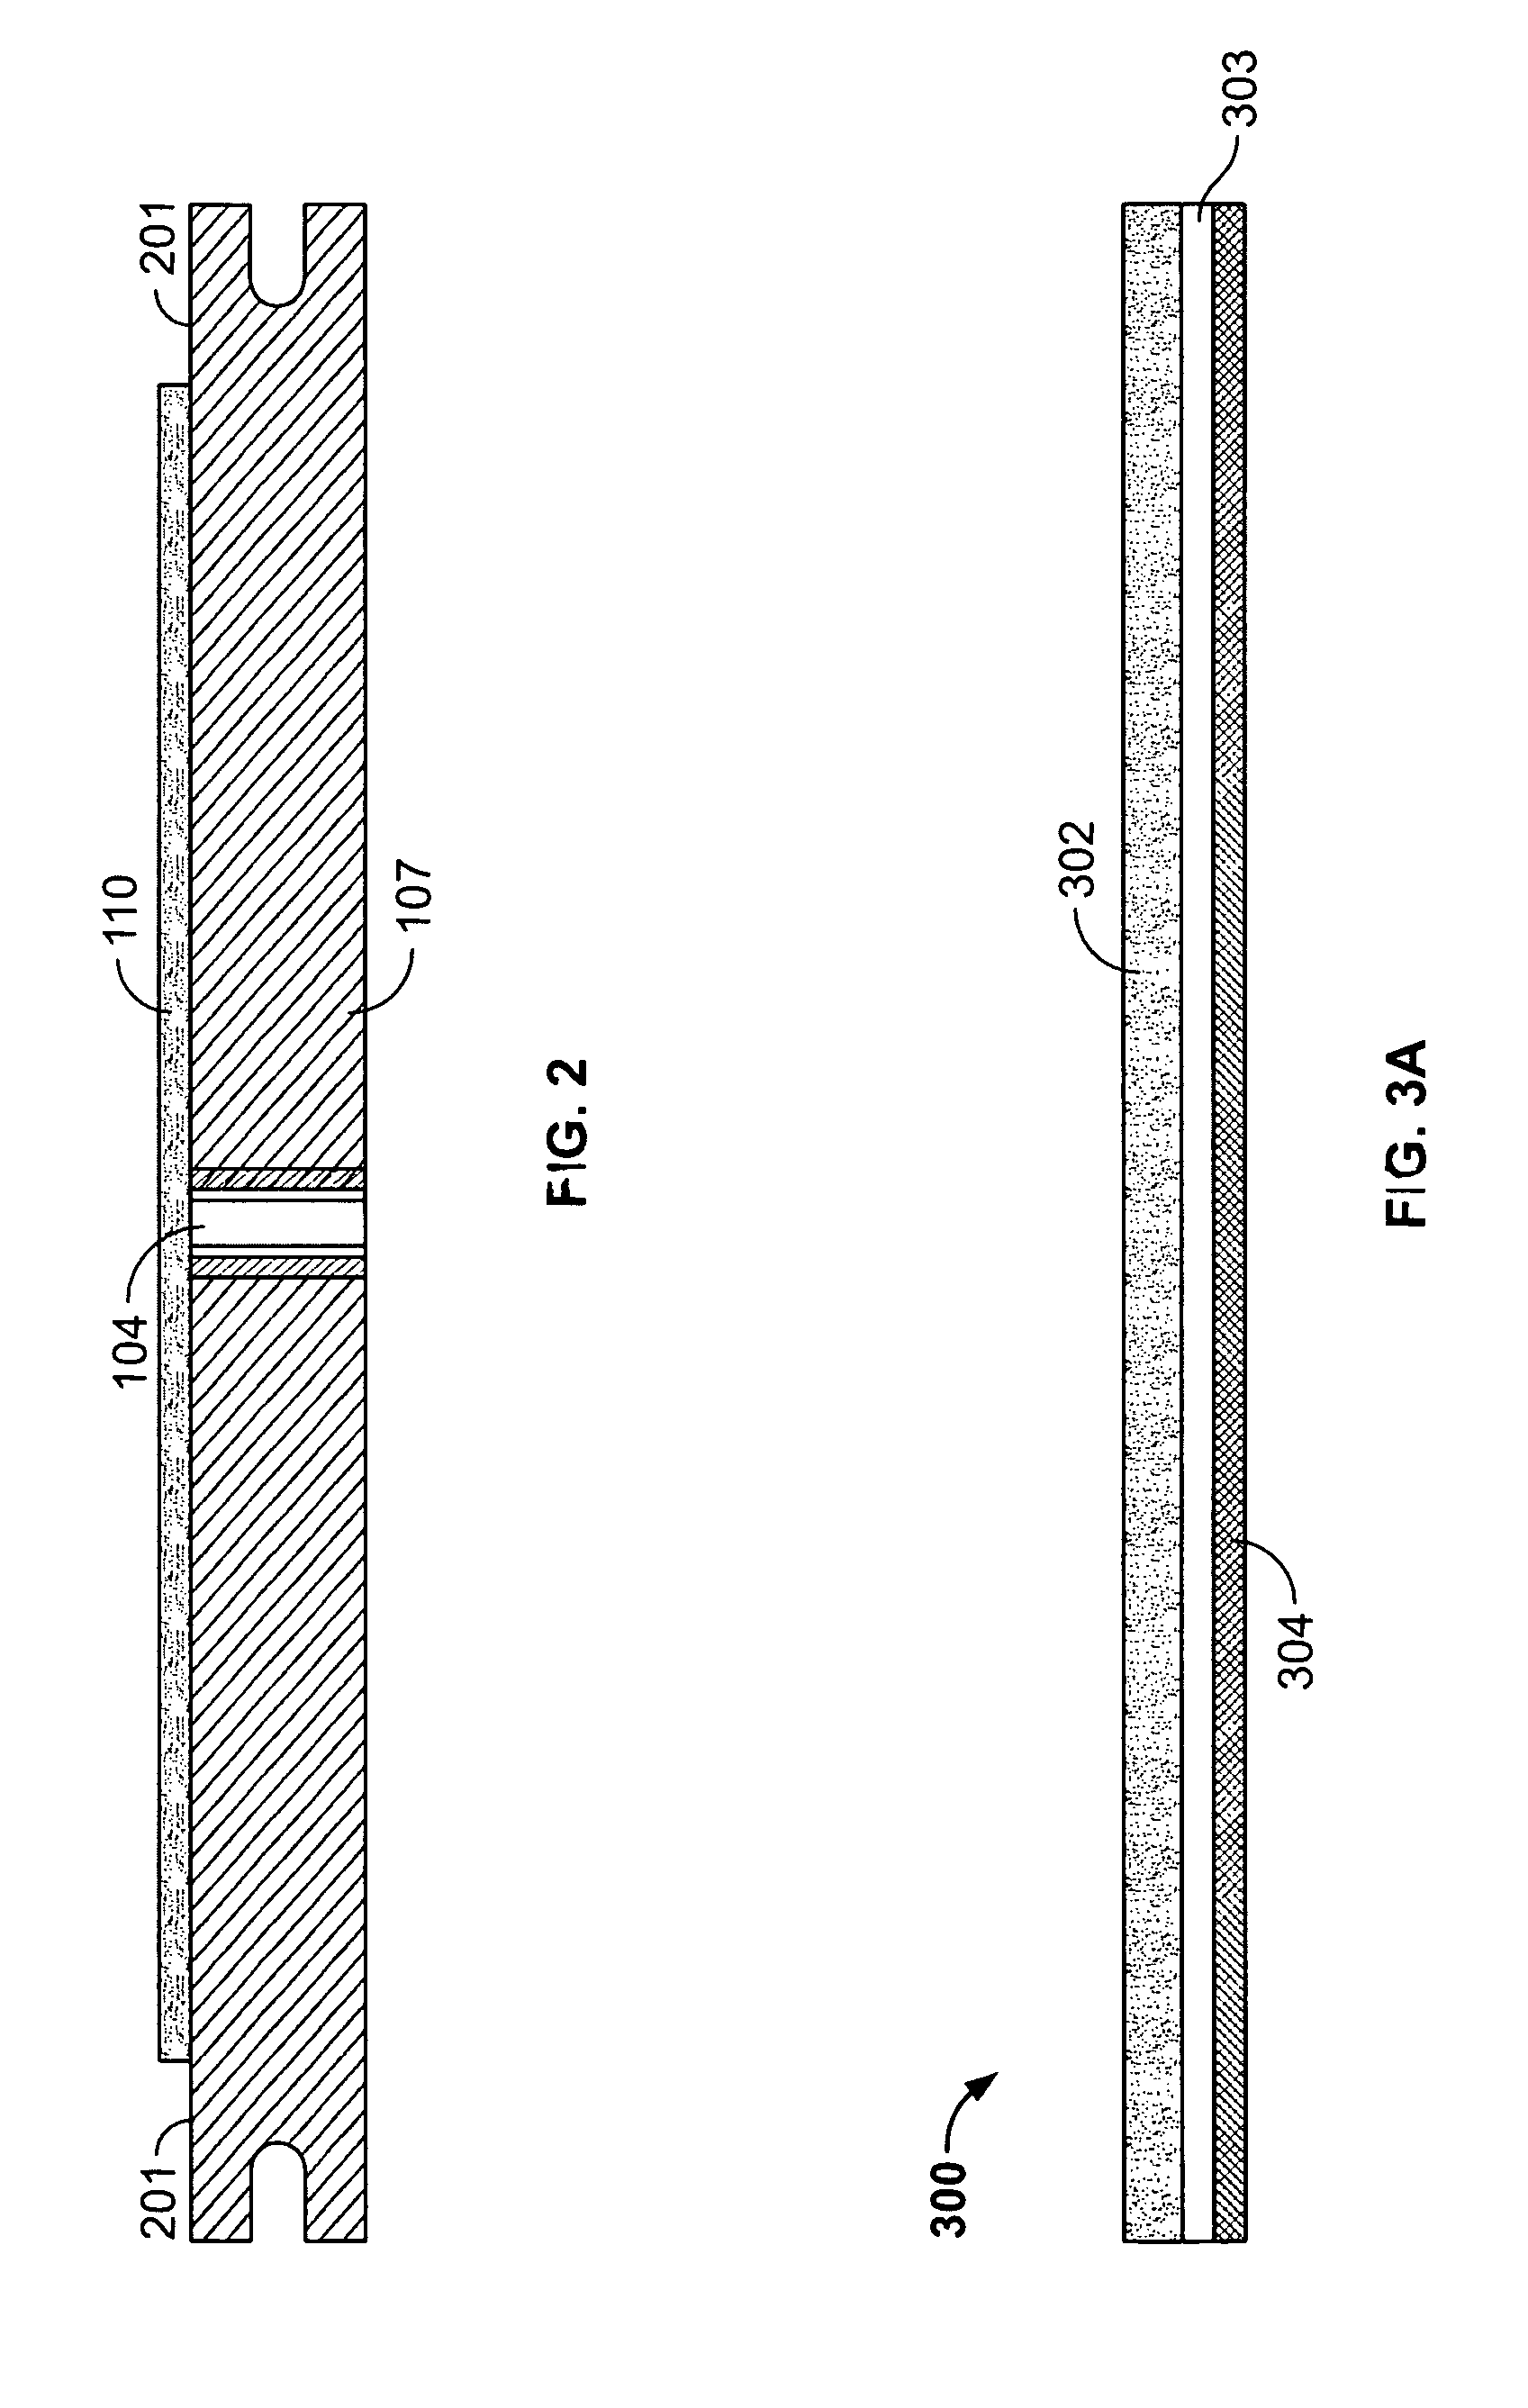 Extending storage time of removed plasma chamber components prior to cleaning thereof